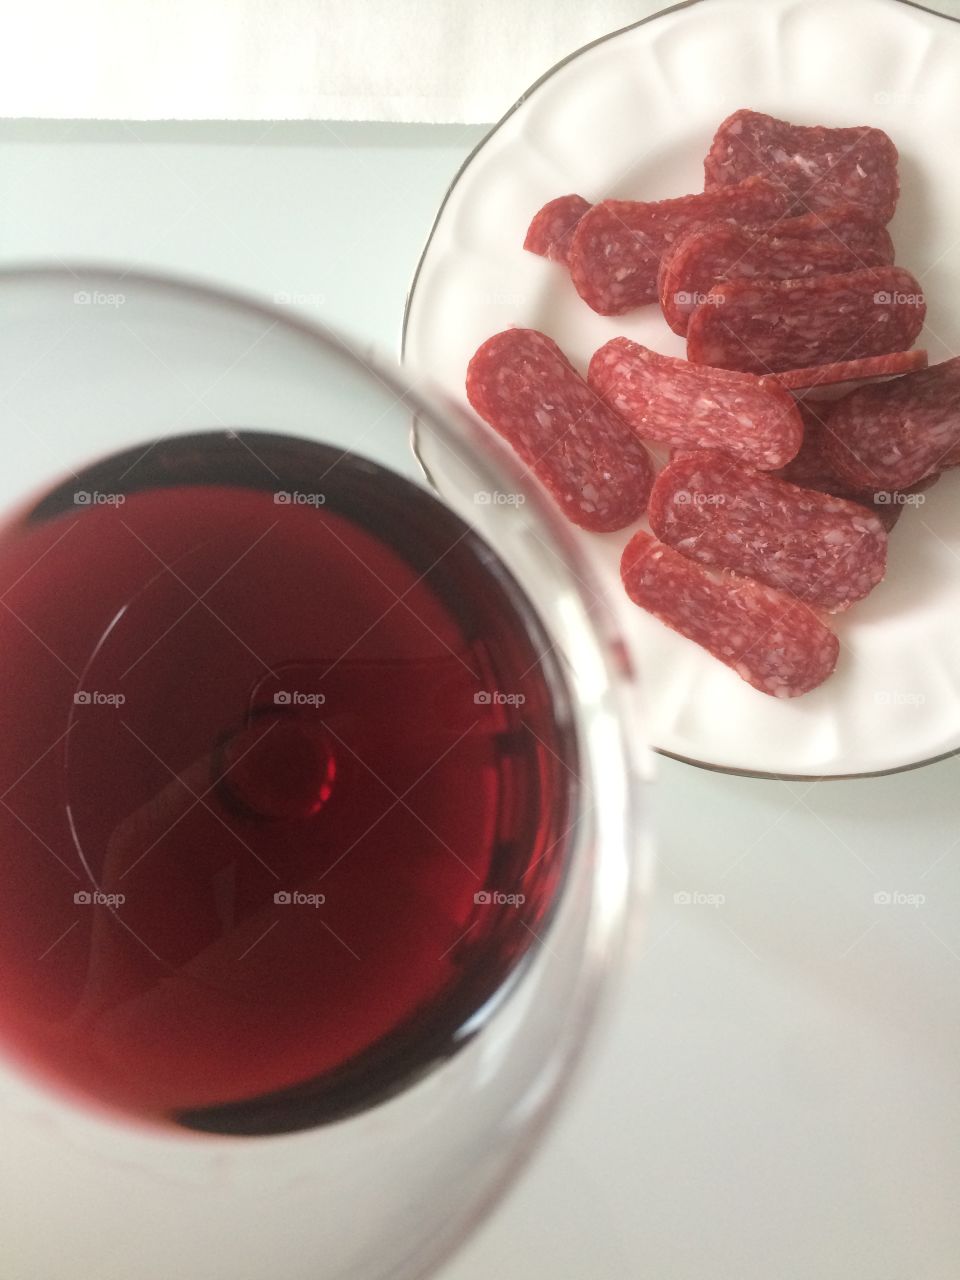 Wine and dry meat